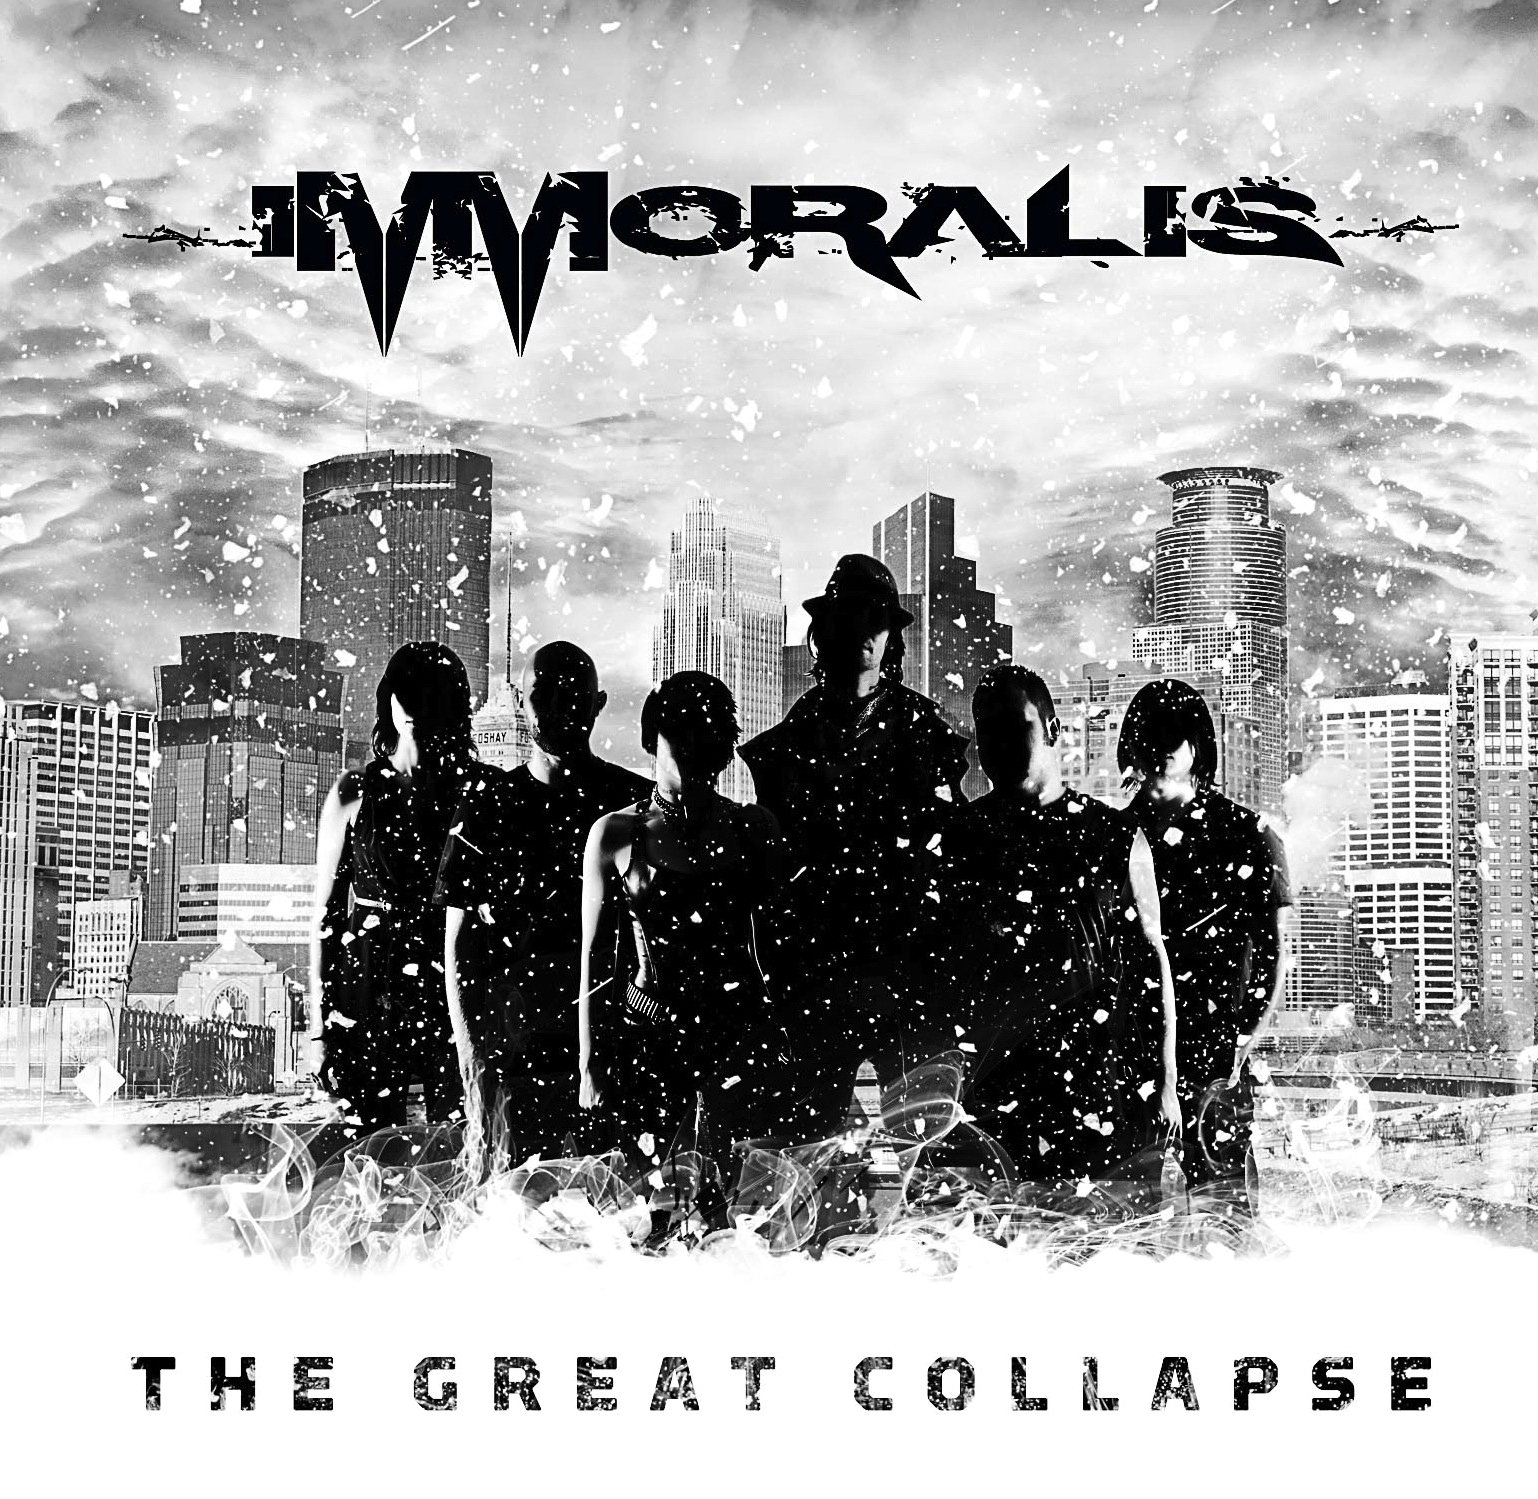 Means to an end. The great Collapse. A means to an end. In Solitude. World Collapse mp3.